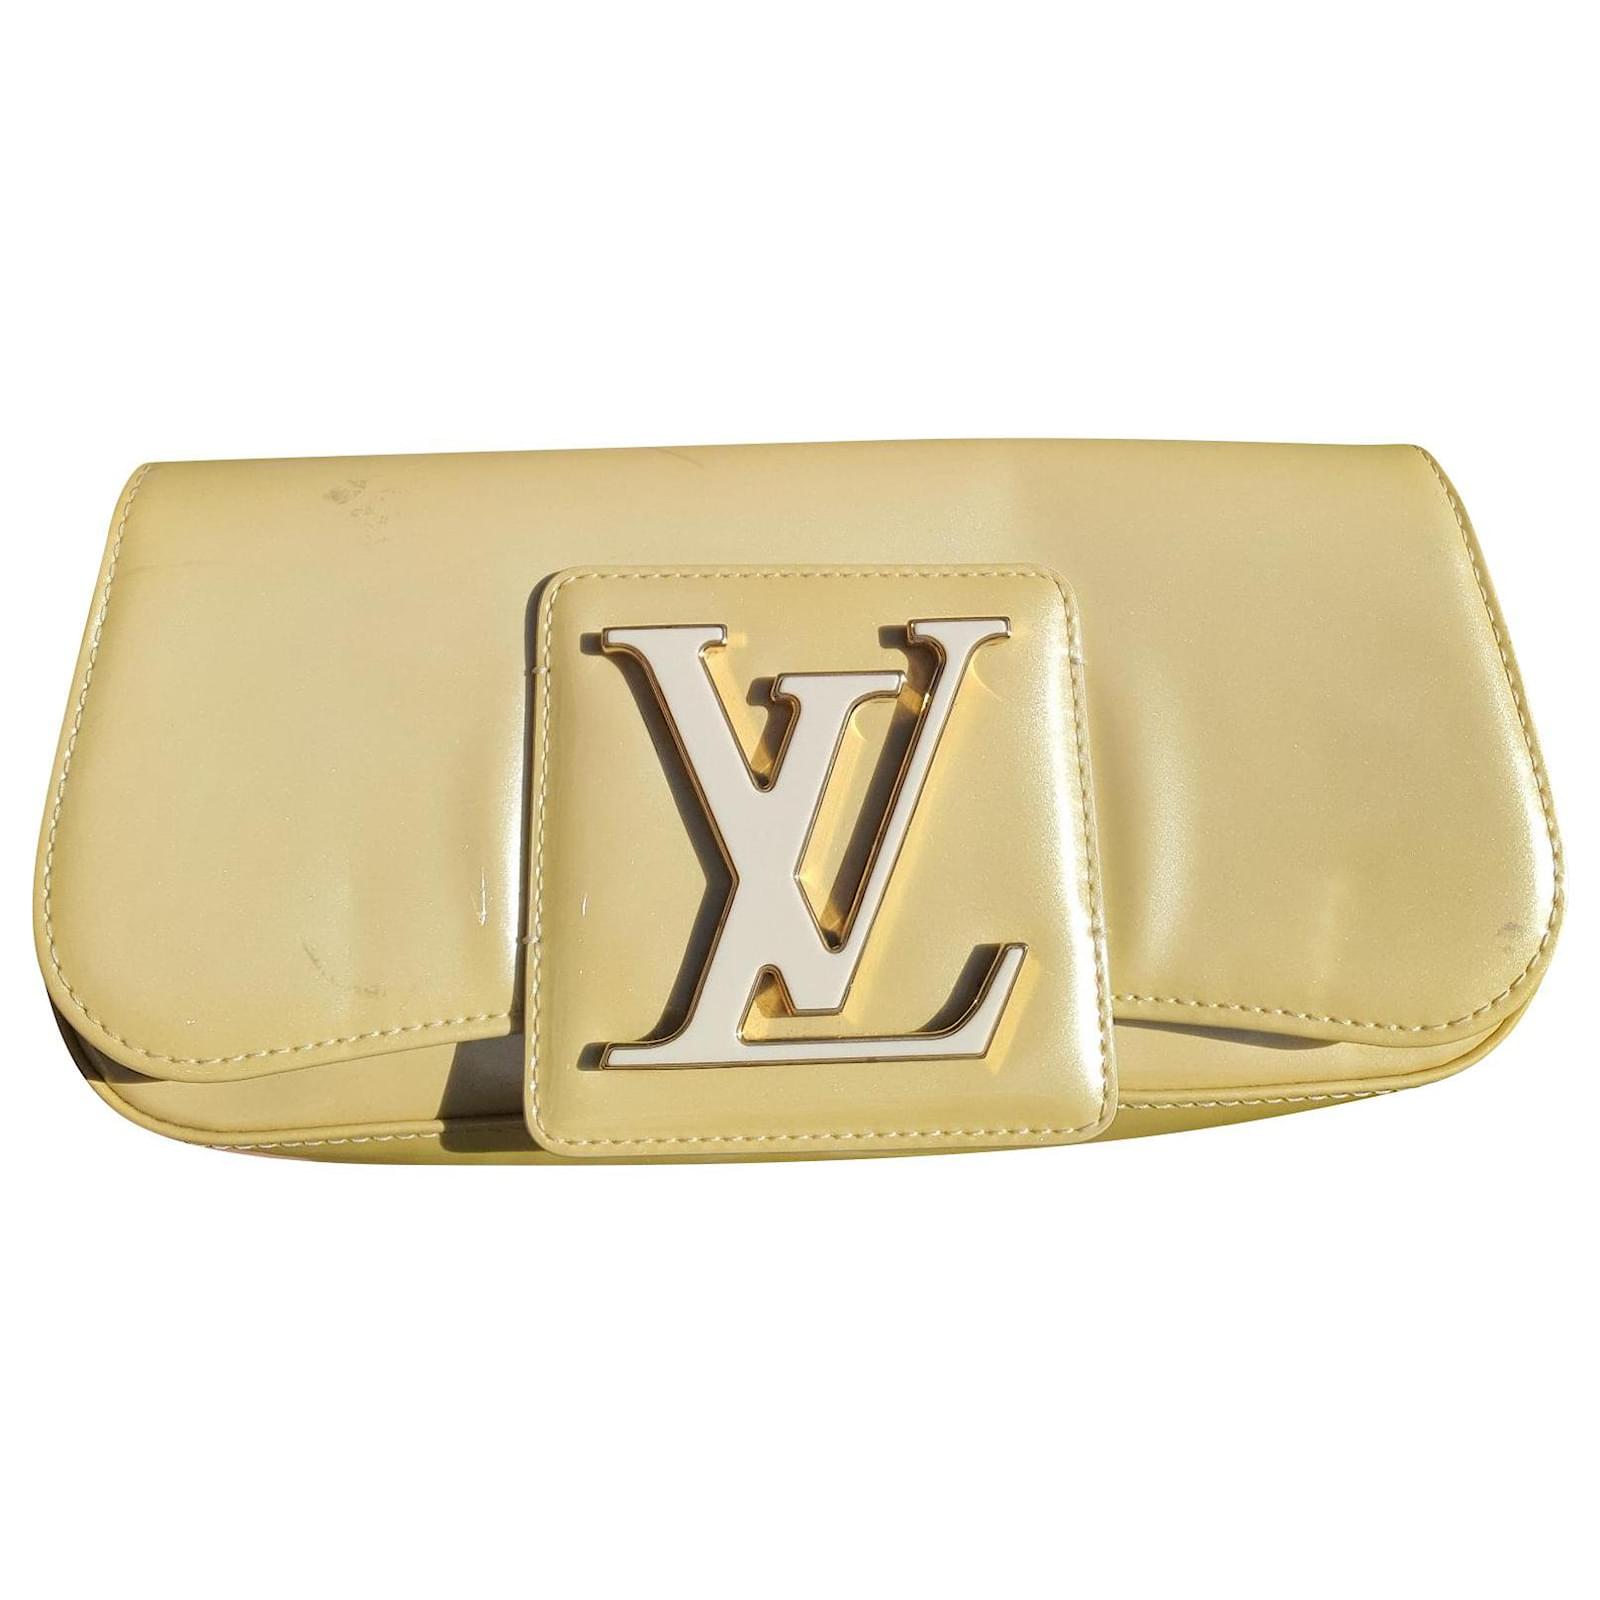 Patent leather clutch bag Louis Vuitton Gold in Patent leather